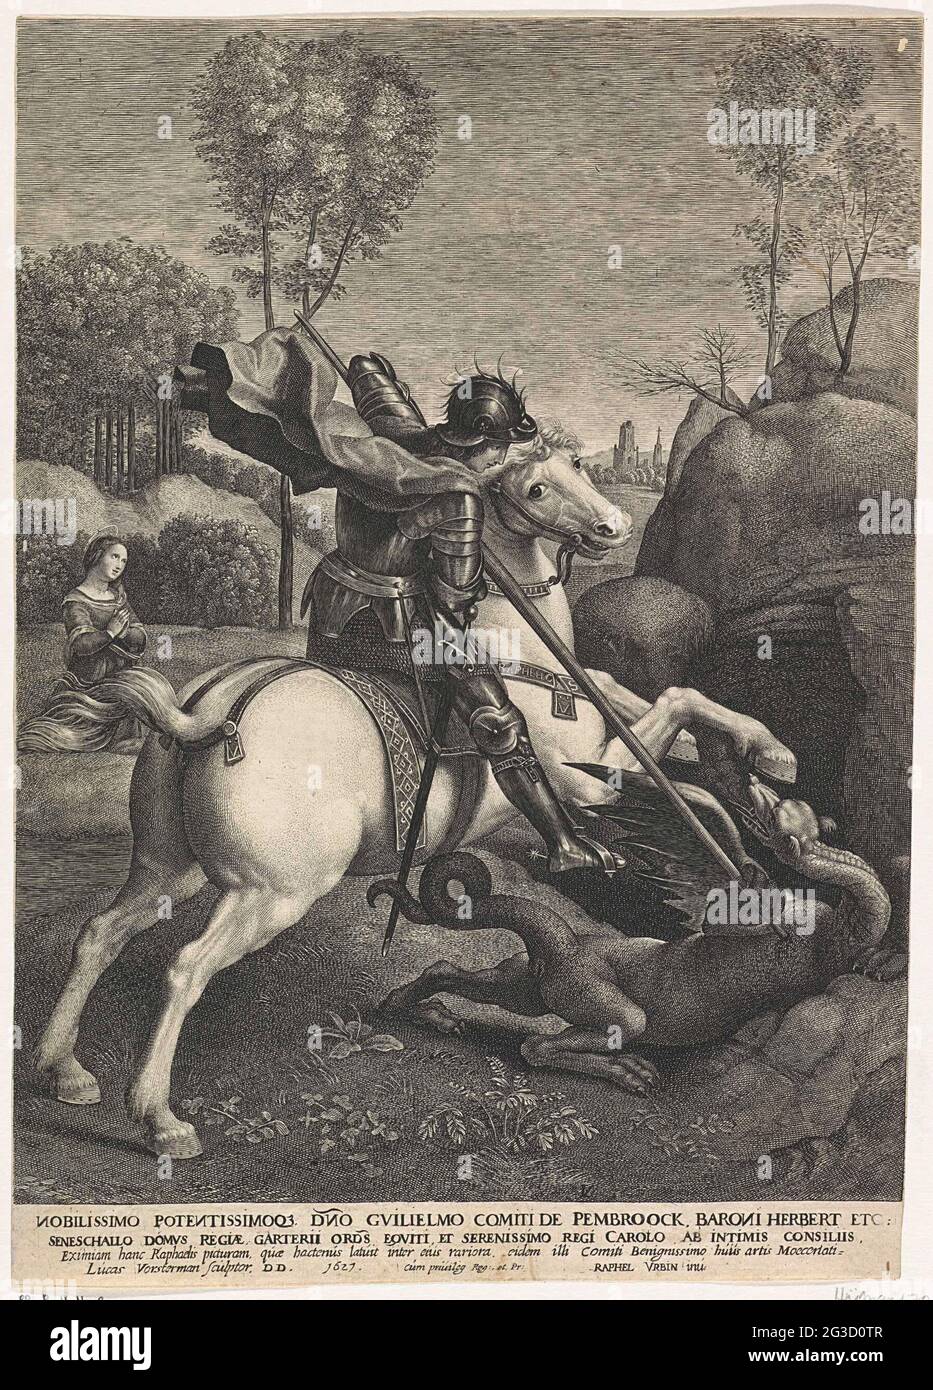 Joris doodt de draak Holy George kills the dragon. A woman fleeing in panic  for the dragon. In the background, a landscape with ruins of Roman  gebouwen. Manufacturer : printmaker Cornelis Cort (